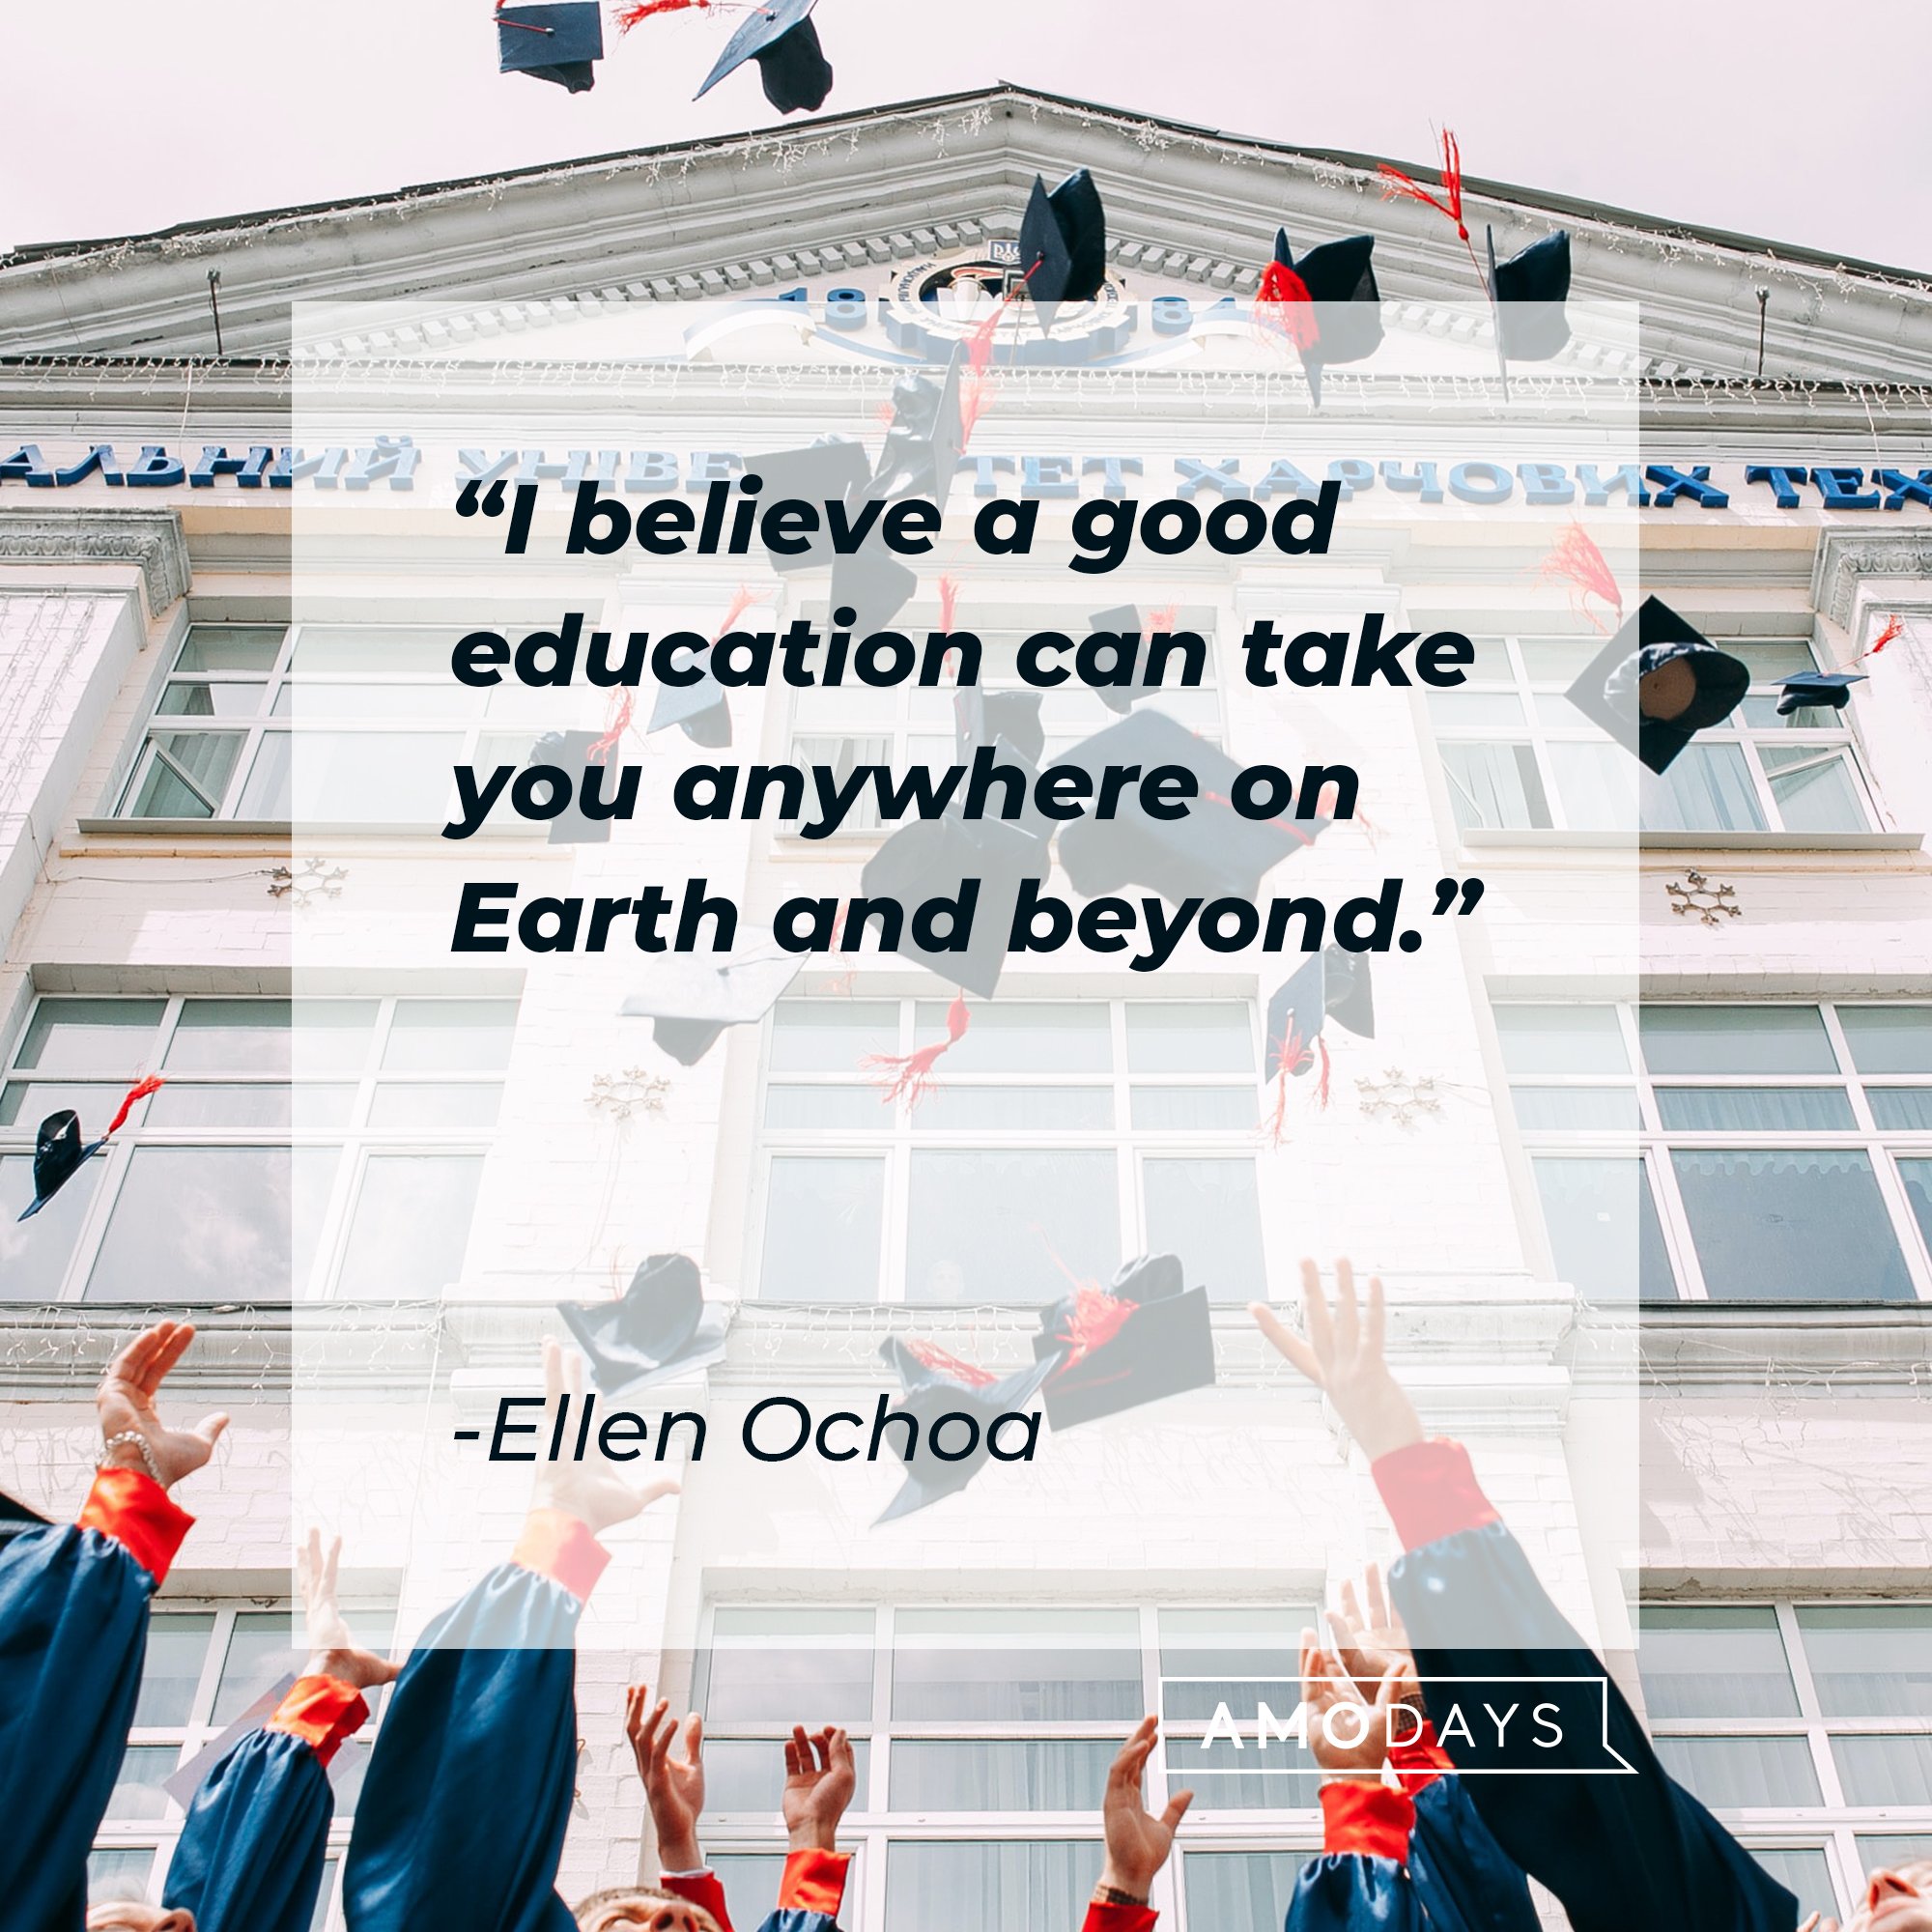  Ellen Ochoa's quote: "I believe a good education can take you anywhere on Earth and beyond." | Image: AmoDays